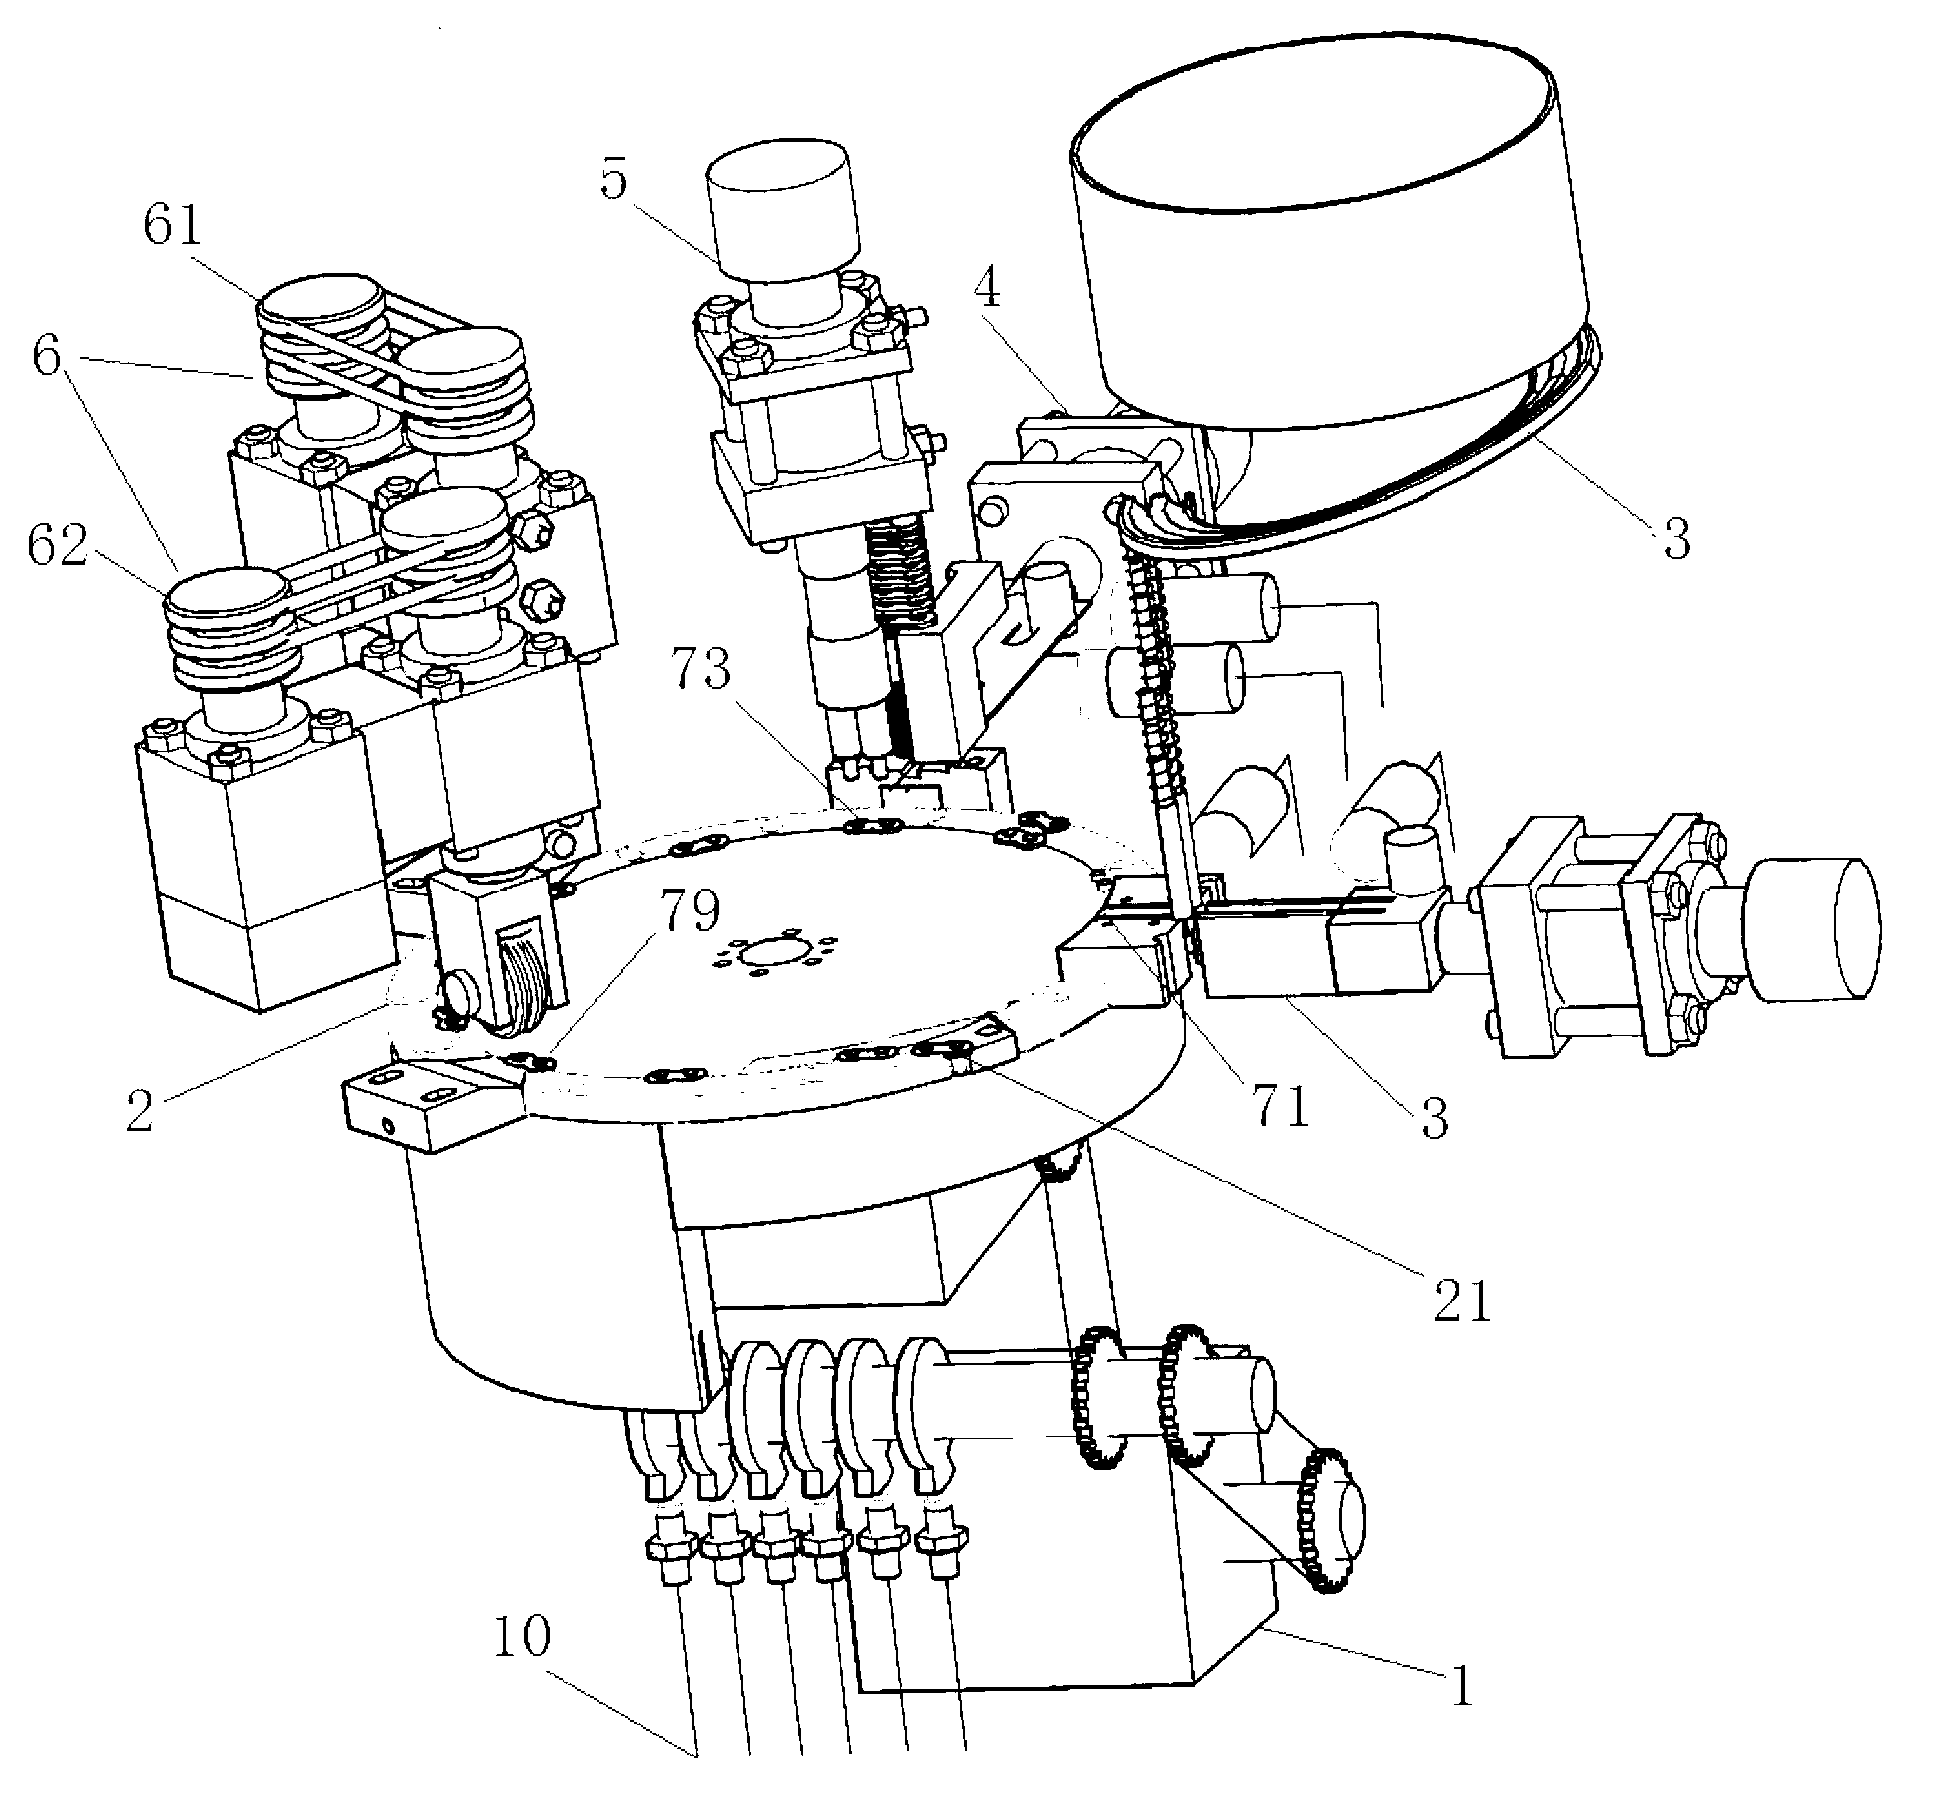 Chain connector assembly machine